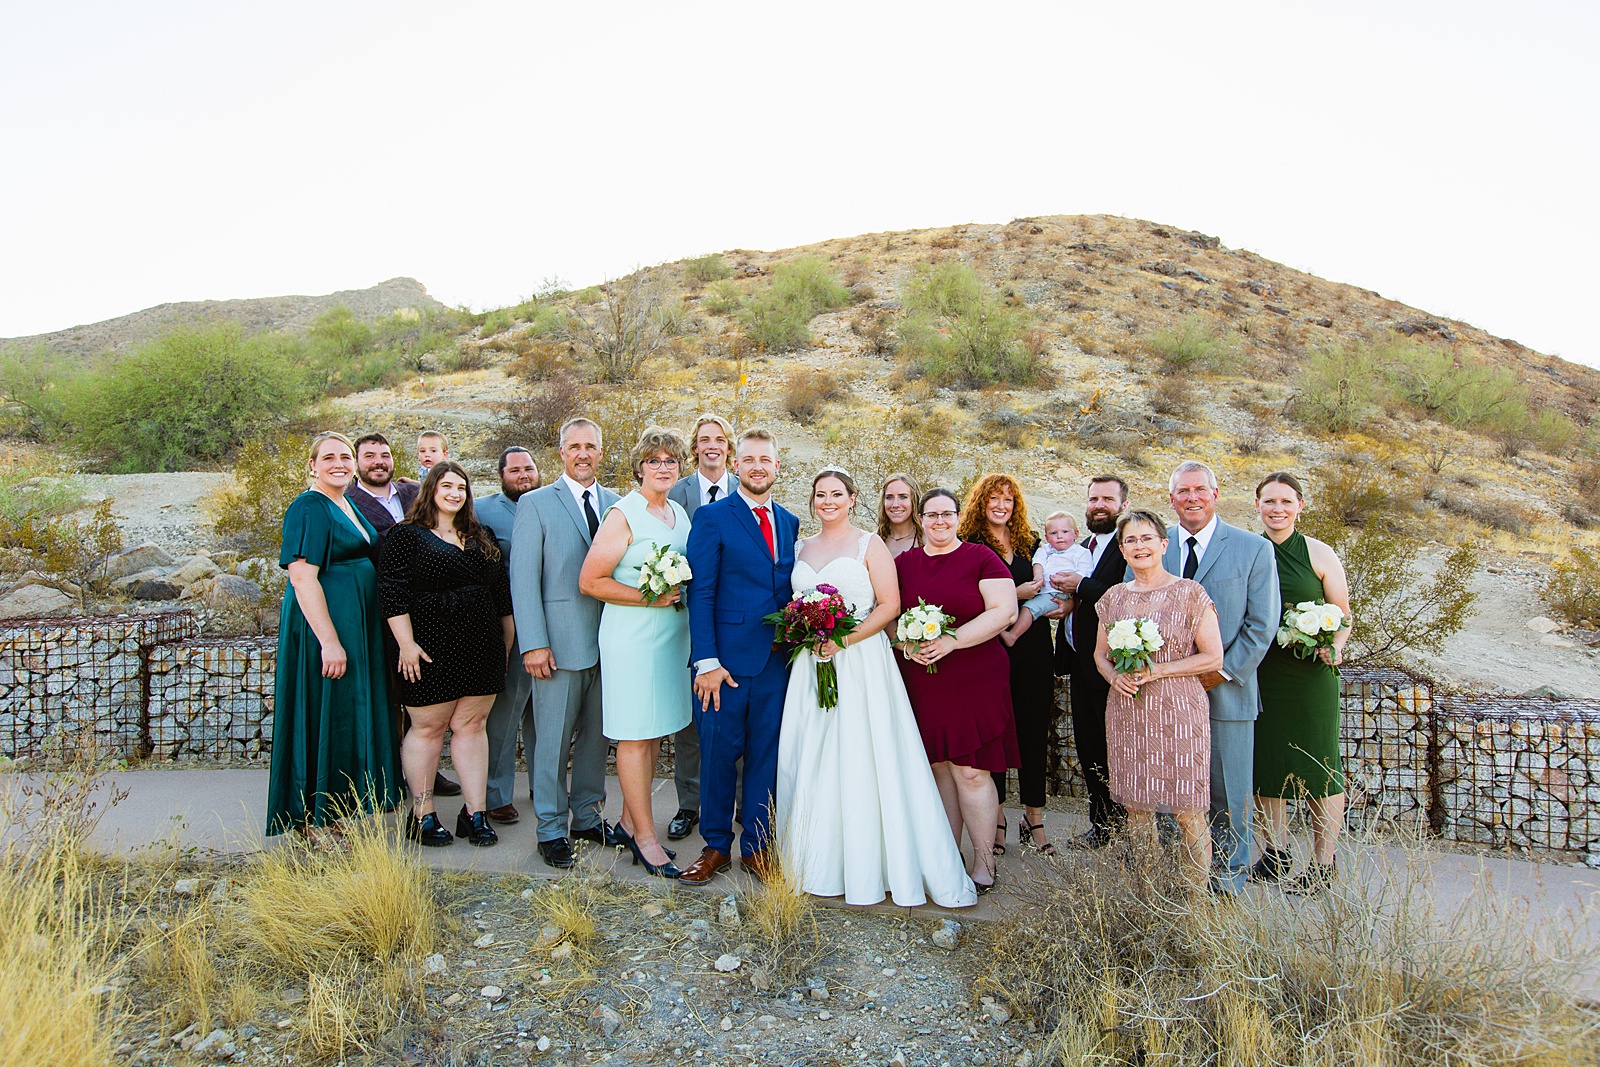 Family portraits at intimate desert by Juniper and Co Photography.